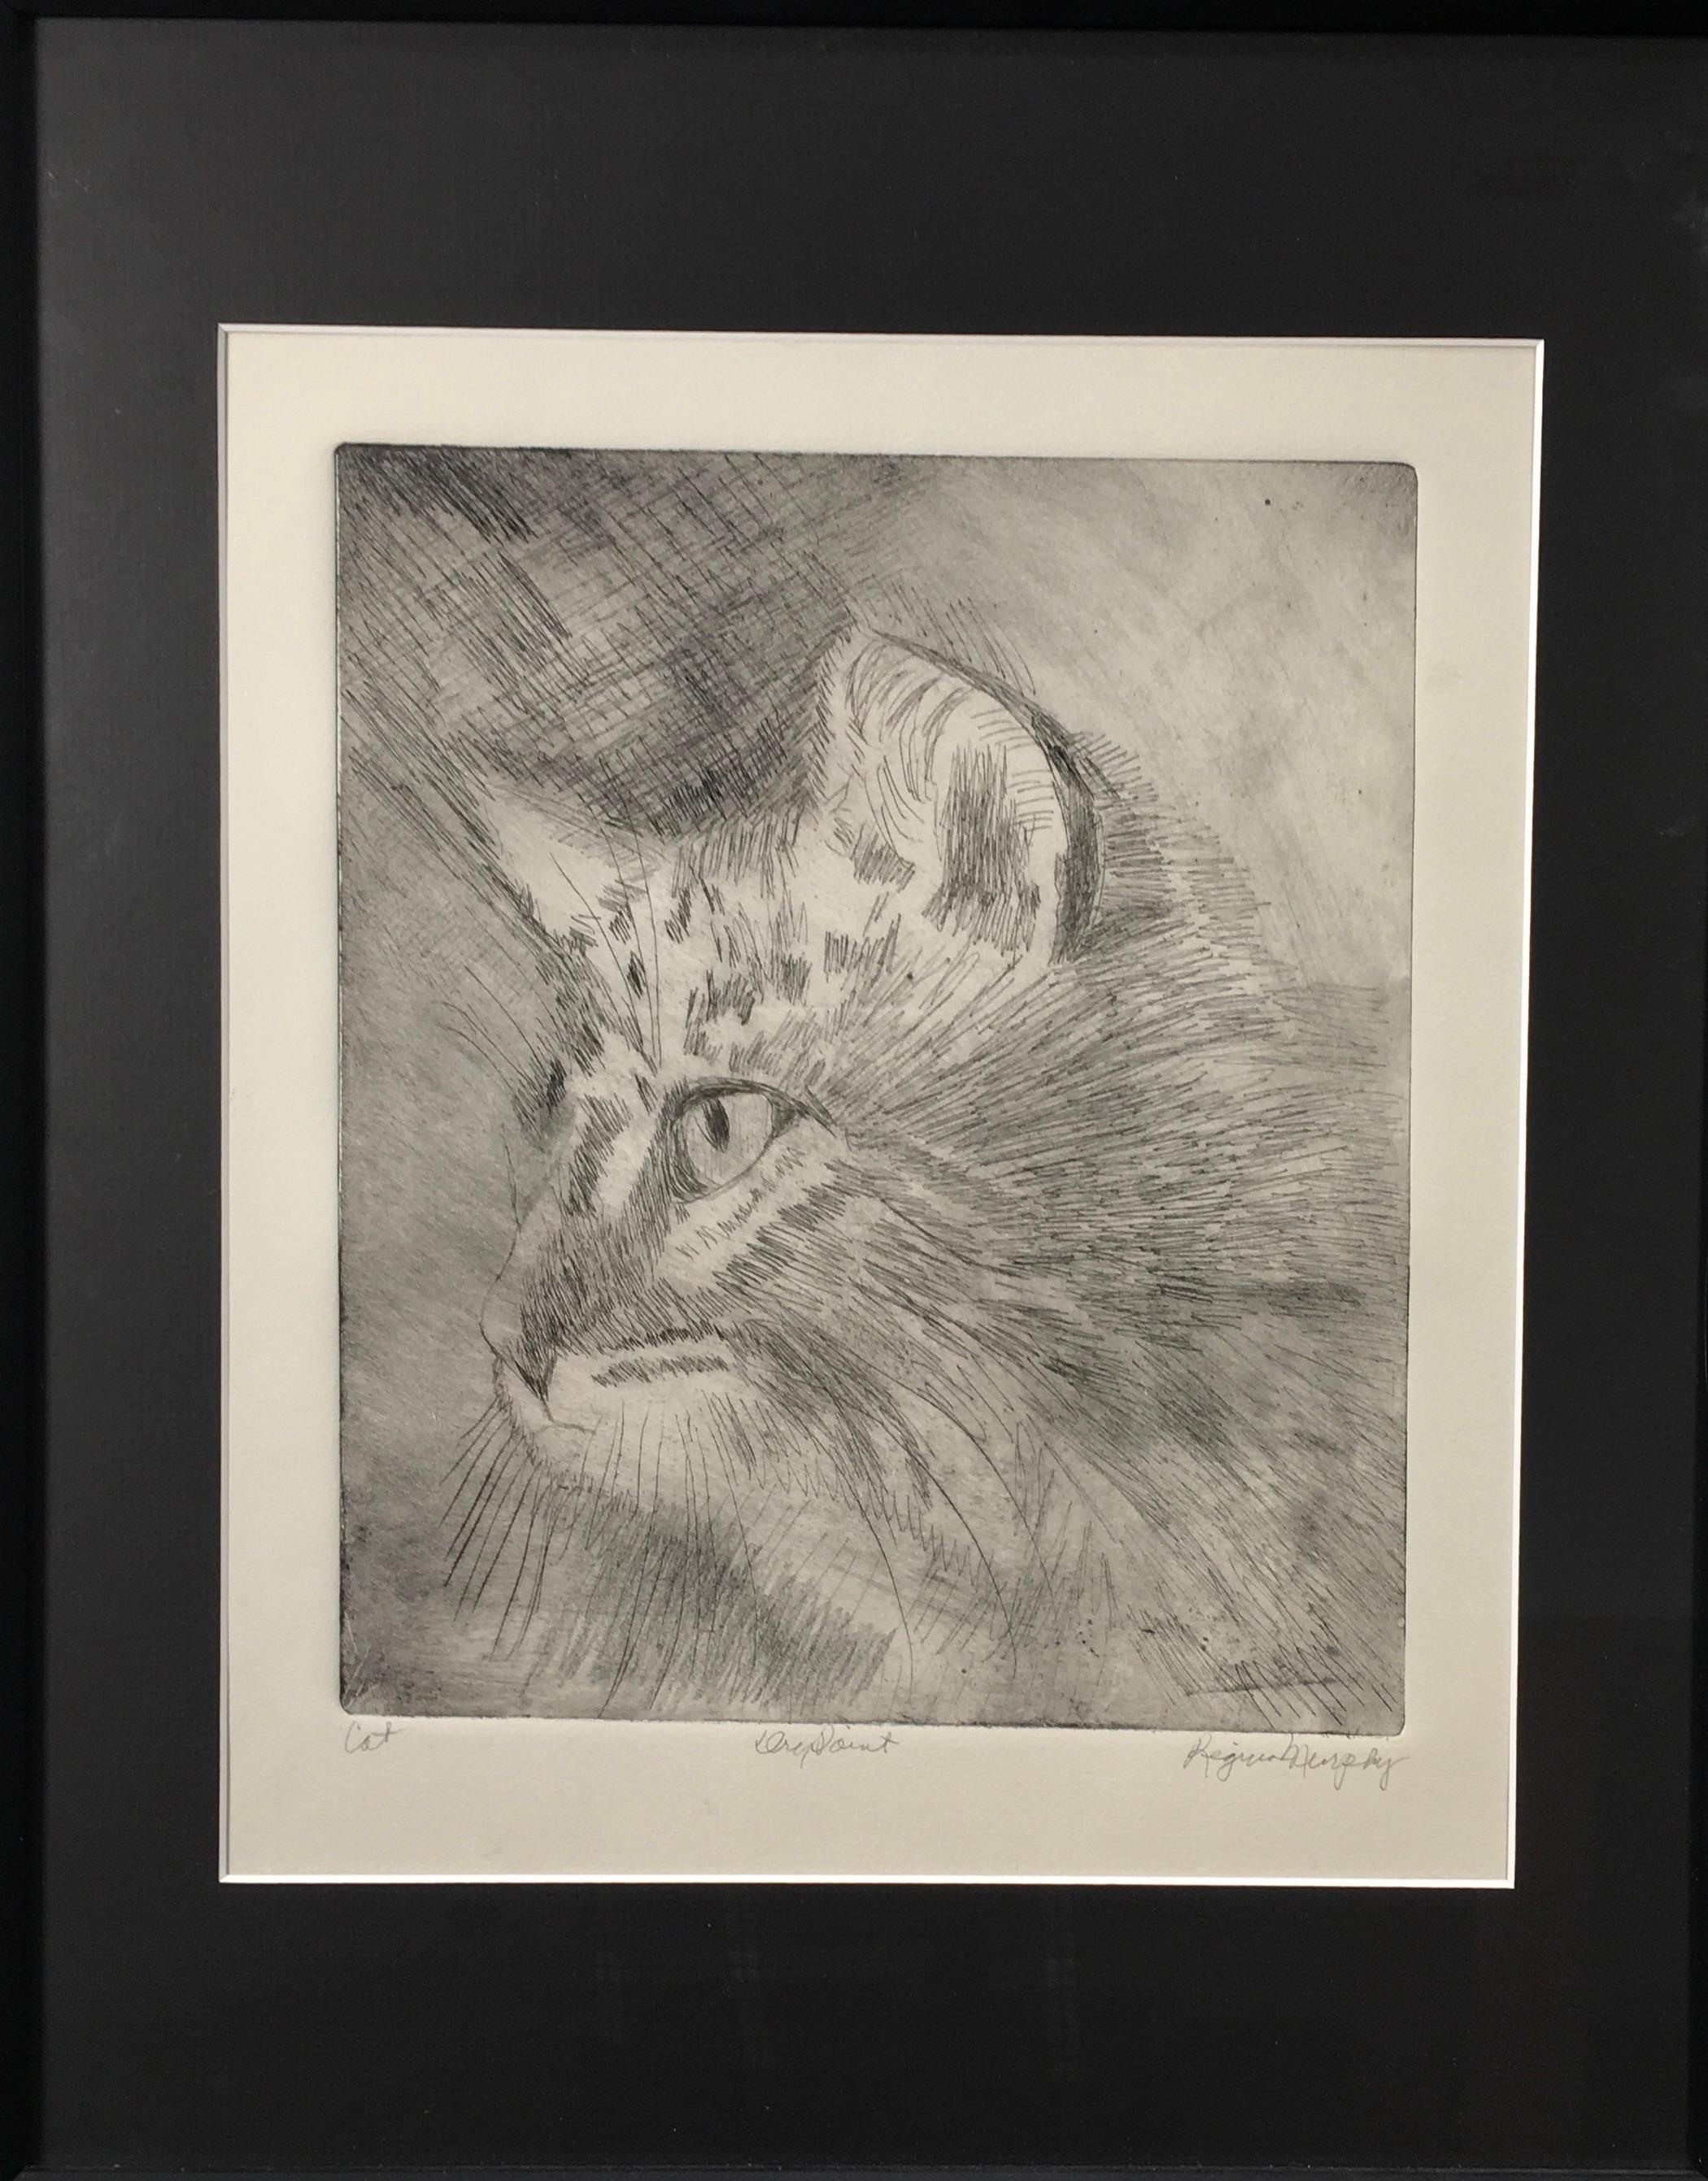 This 12" x 10" drypoint etching by Regina Murphy depicts the side profile of a beloved domestic cat's head. The head is facing to the left and the facial expression is stoic. Each hair of the cat's head is defined, adding to the detailed effect the